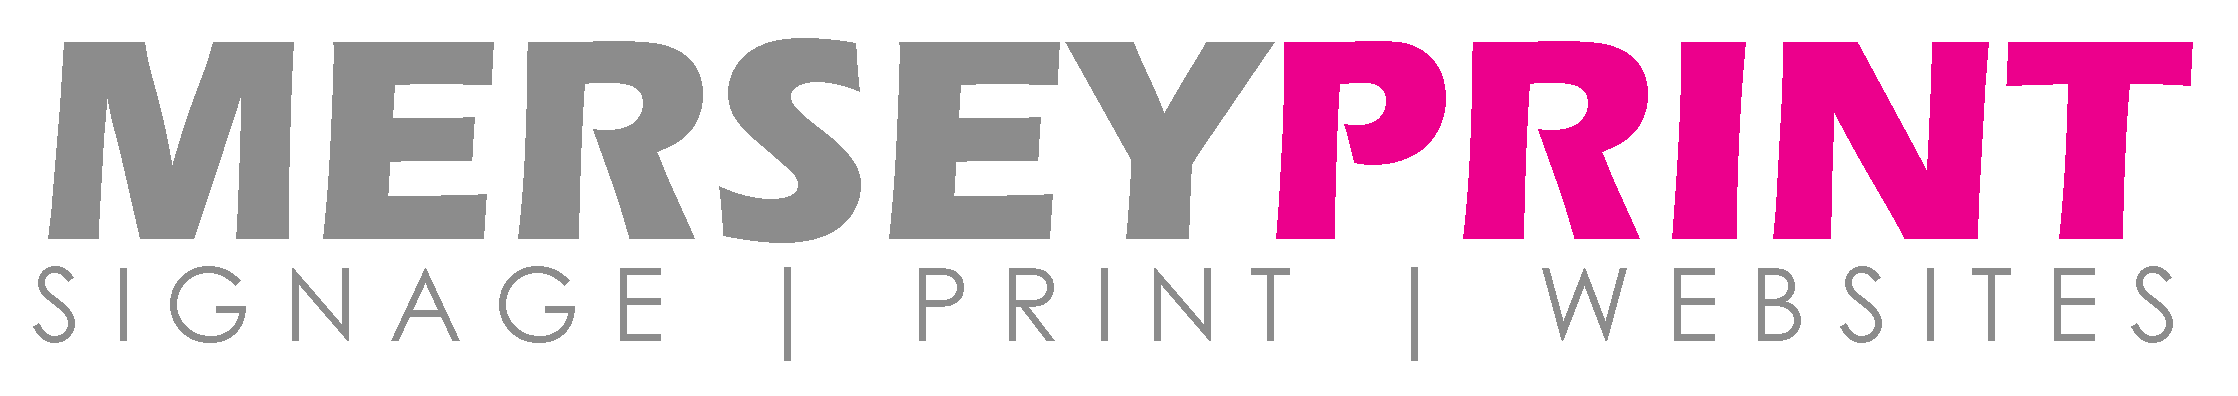 Mersey Print | Local Sign & Print Company | Local Sign Maker